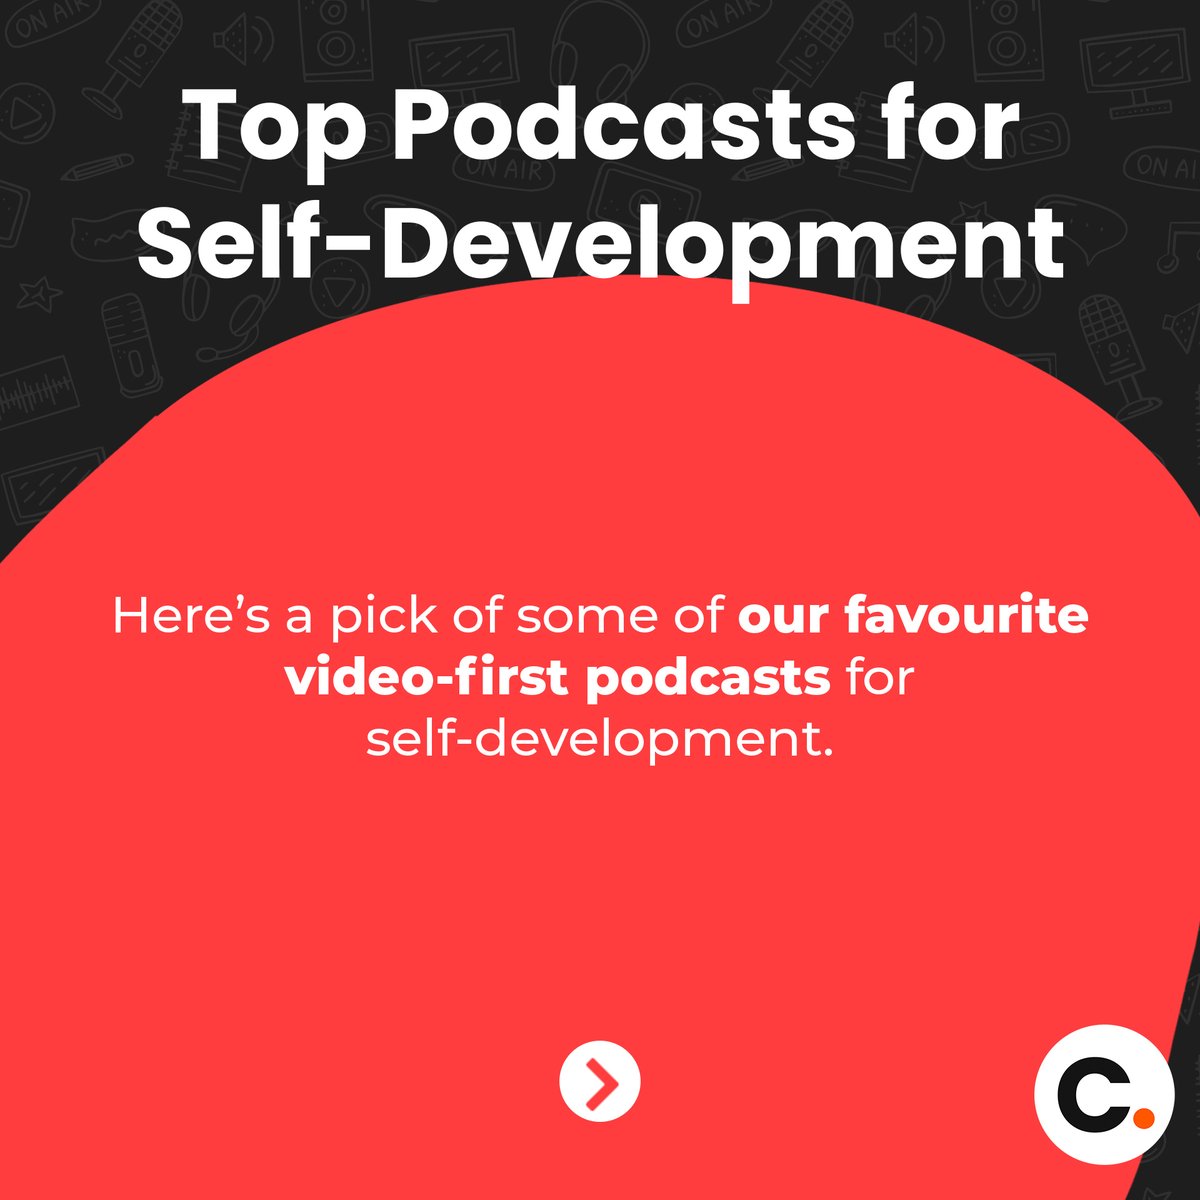 🧵Here are our favourite self-development podcasts. What's yours?

#podcast #videopodcast #youtubepodcast #podcastediting #podcasteditor #videopodcasteditor
@timferriss @SteveBartlettSC  @joerogan @aliabdaal @lexfridman